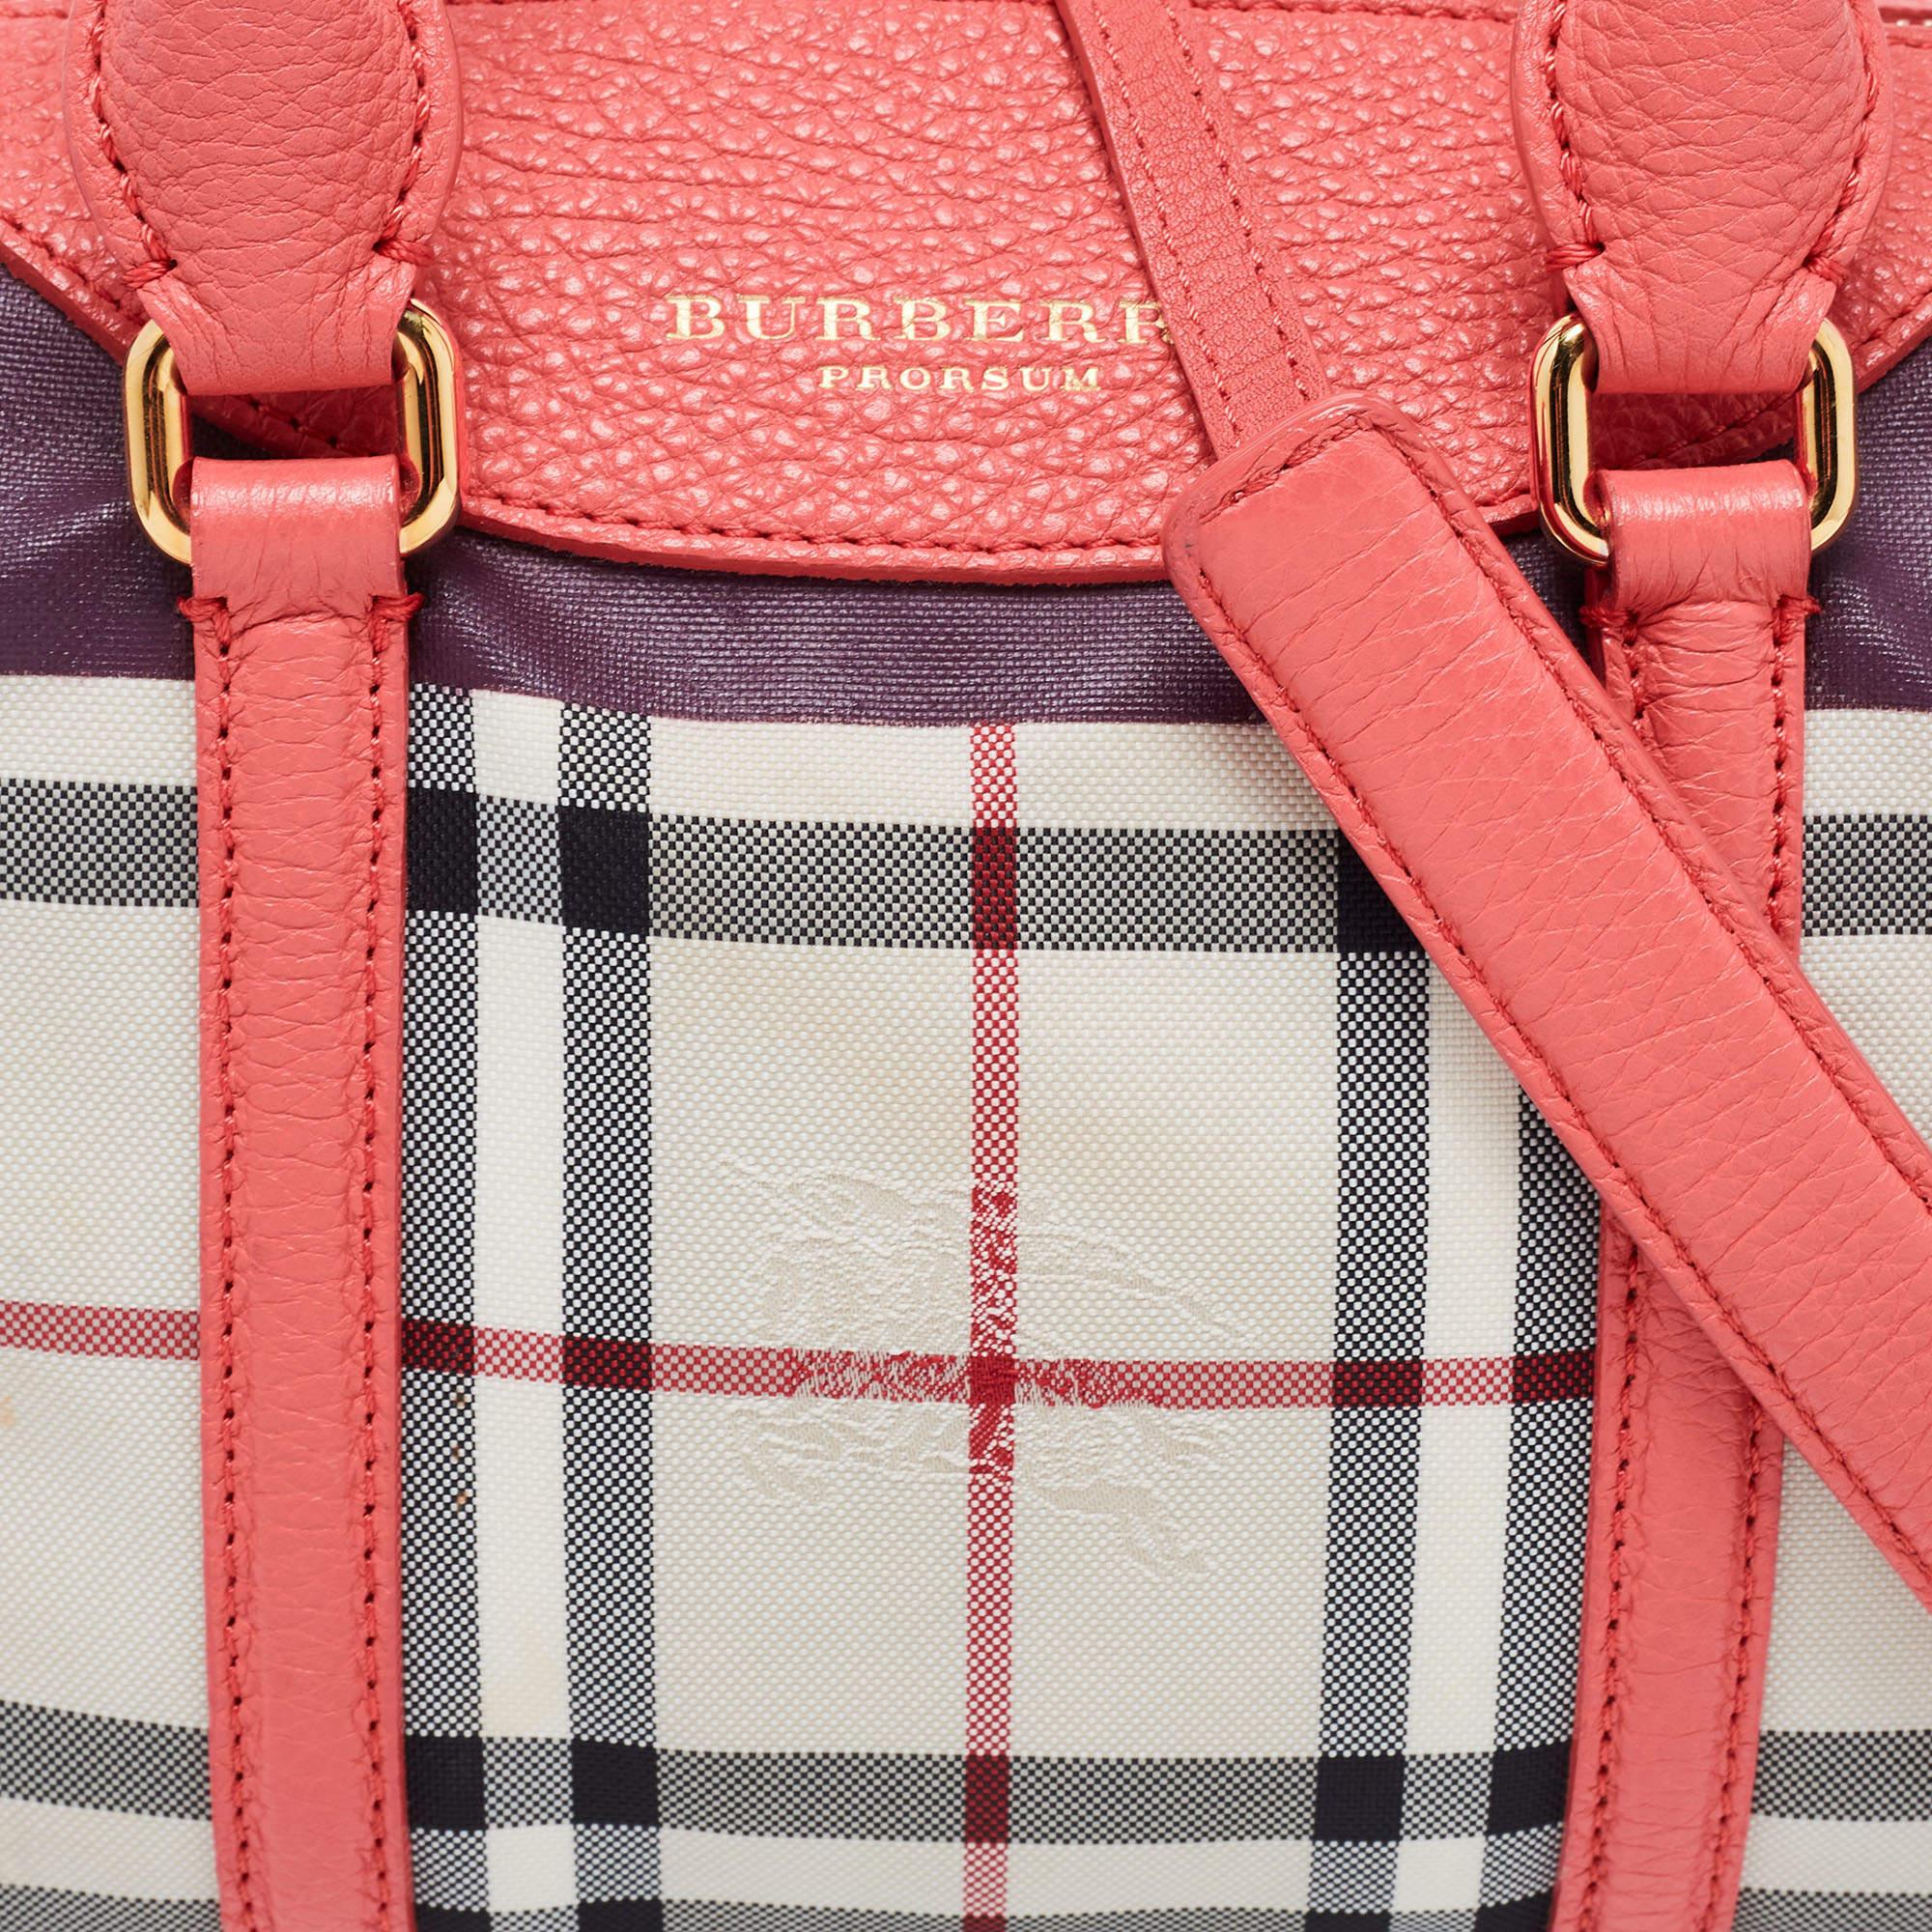 Burberry Prorsum Pink Haymarket Check Coated Canvas and Leather Mini Bee Bag 7